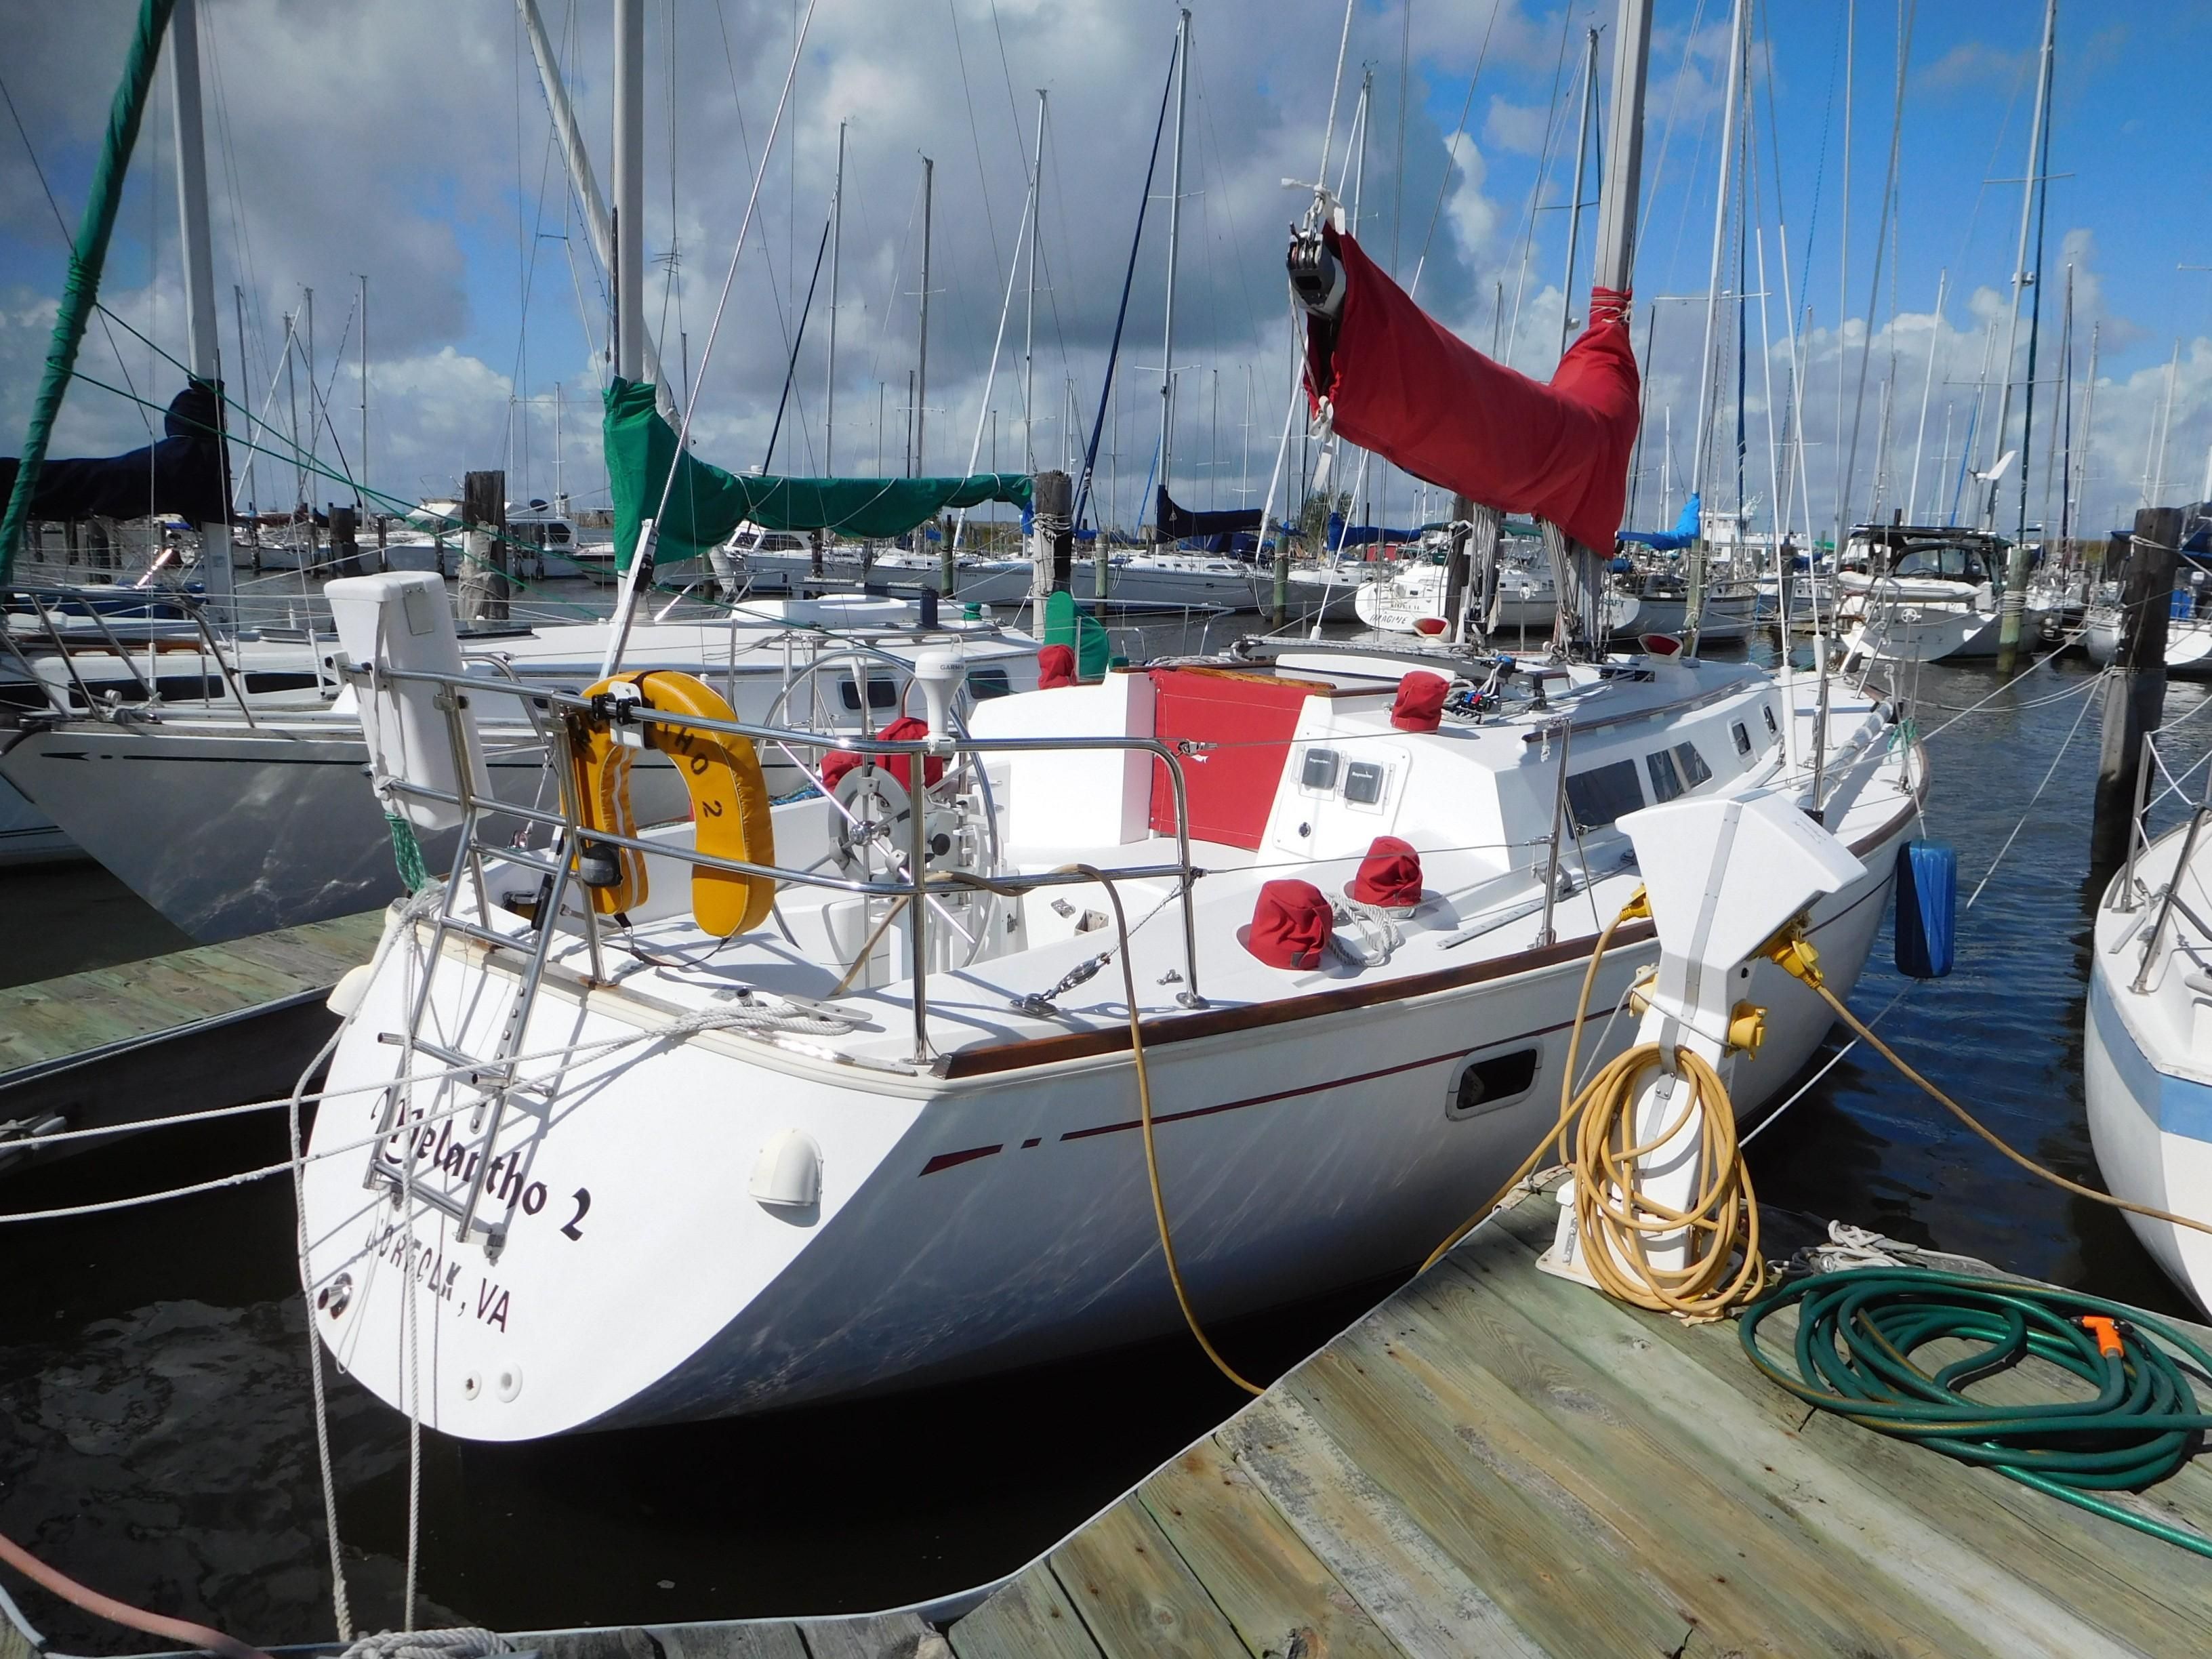 cal 33 sailboat for sale